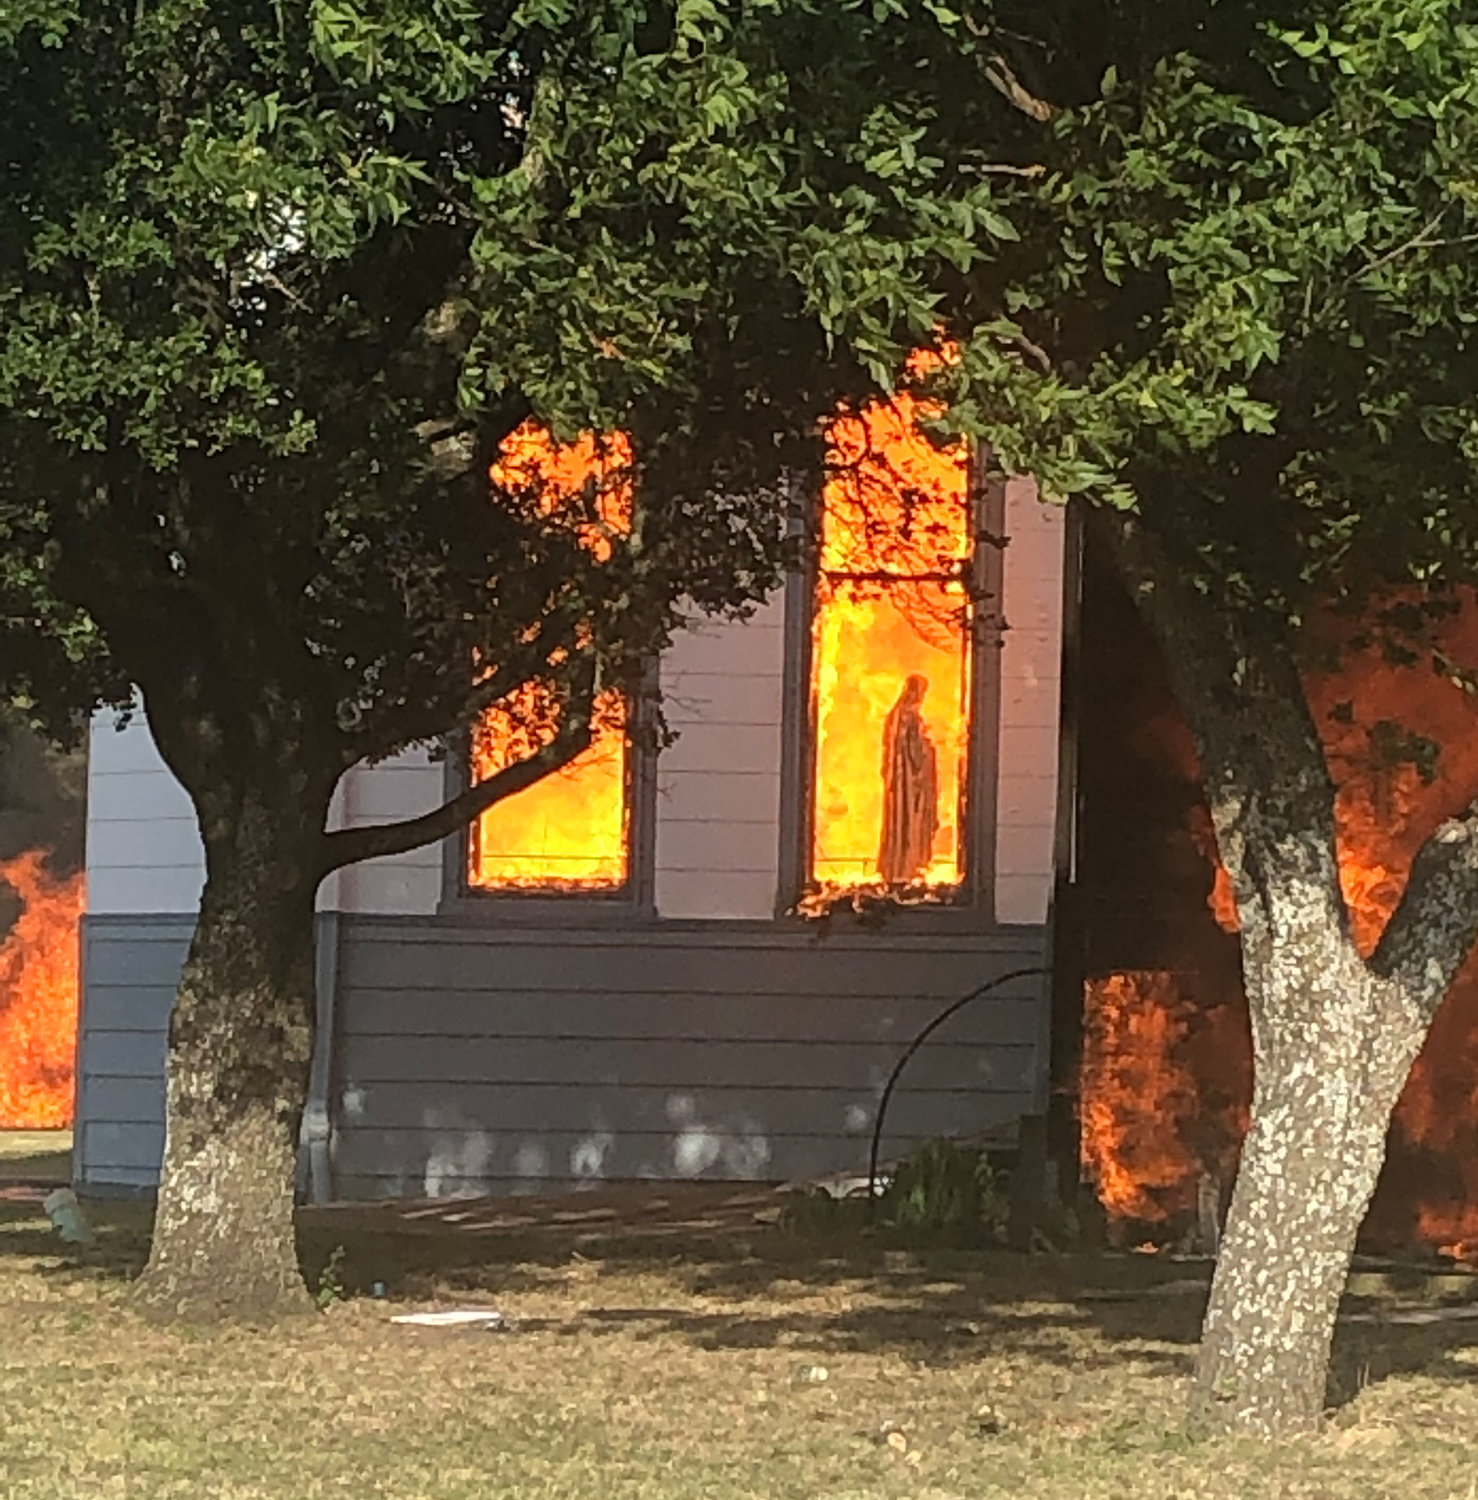 A statue of Mary is seen amid flames through a window in the Church of the Visitation in Westphalia, Texas, July, 29, 2019. The nearly 125-year old wooden church with bell towers on each side, burned to the ground that morning. Since 1883 the parish has served the Catholic community of southwestern Falls County, many of whom are descendents of immigrants from the northwest German region of Westphalia.